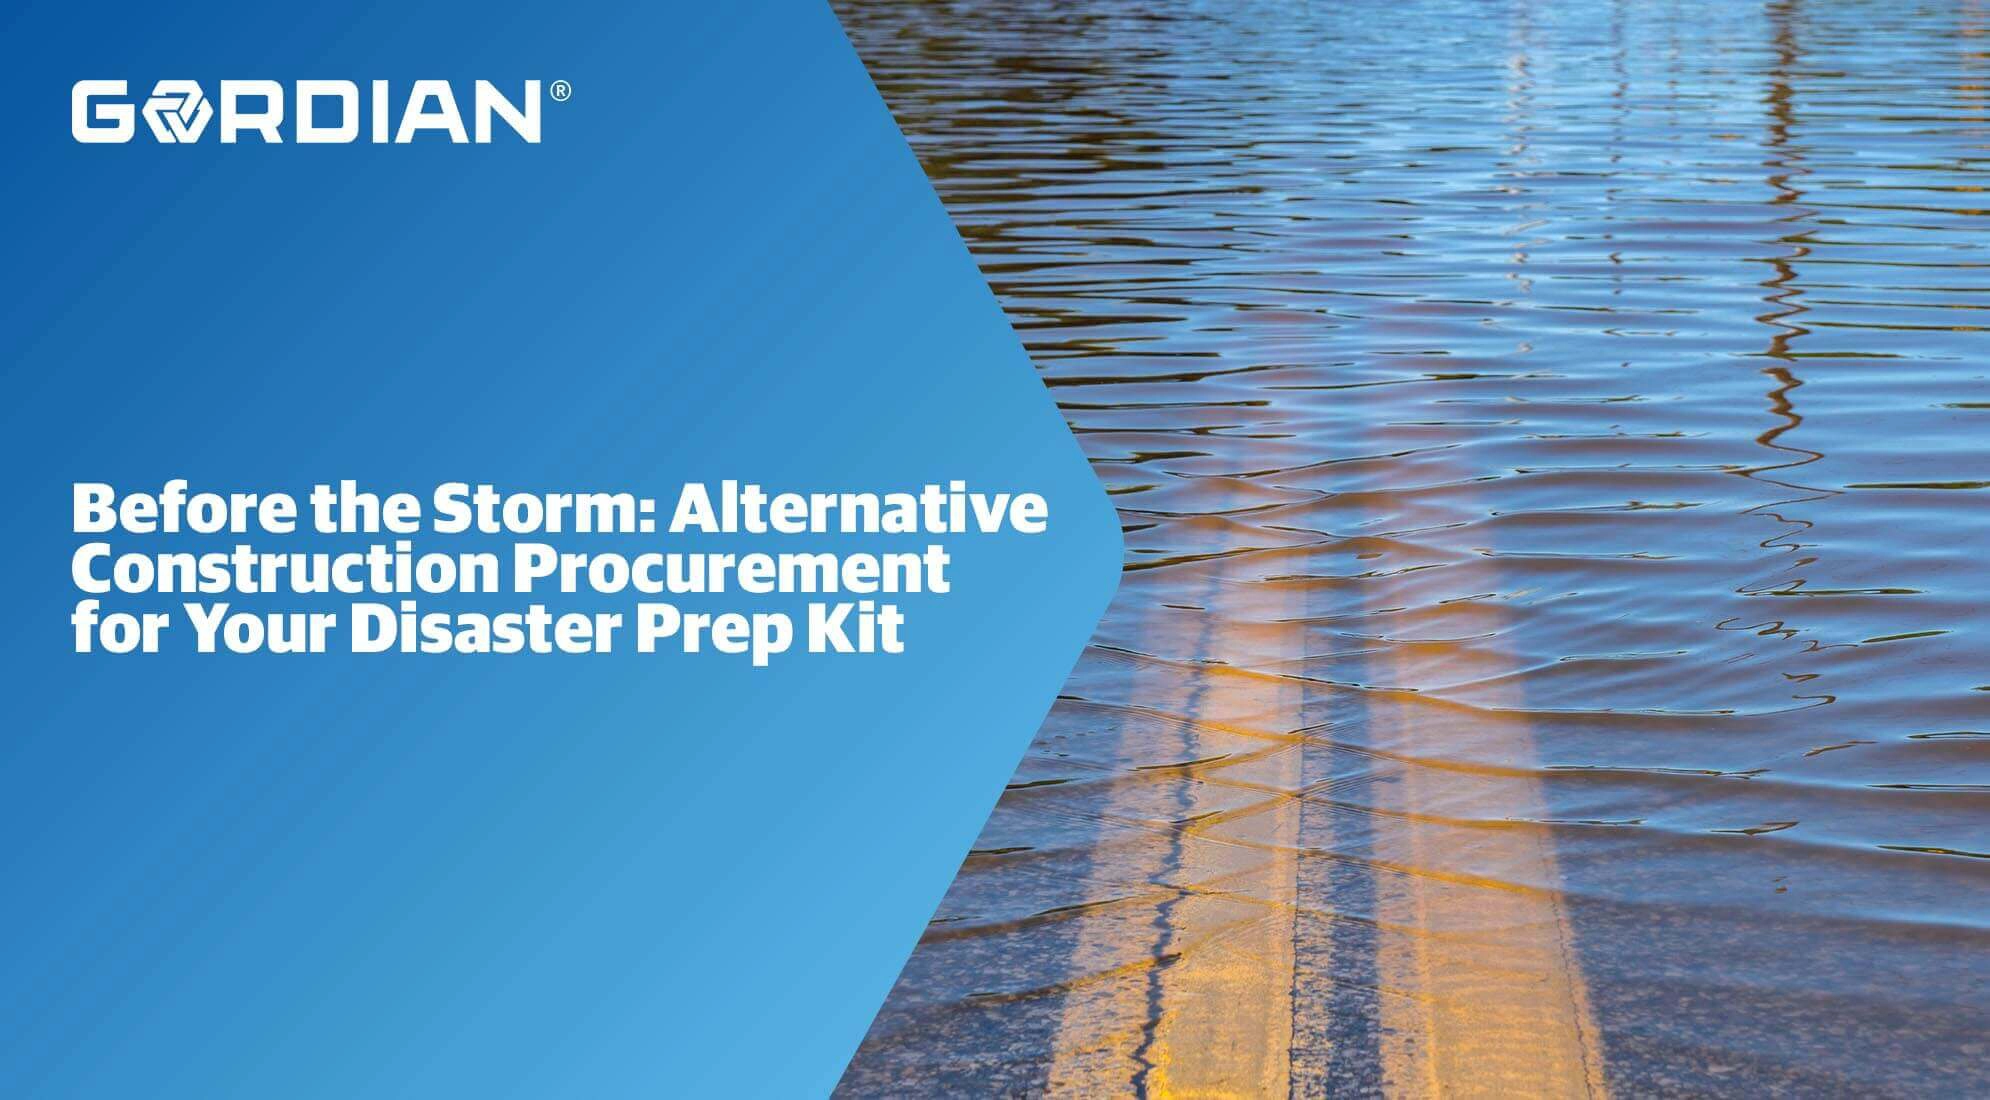 Before the Storm: Alternative Construction Procurement for Your Disaster Prep Kit 5